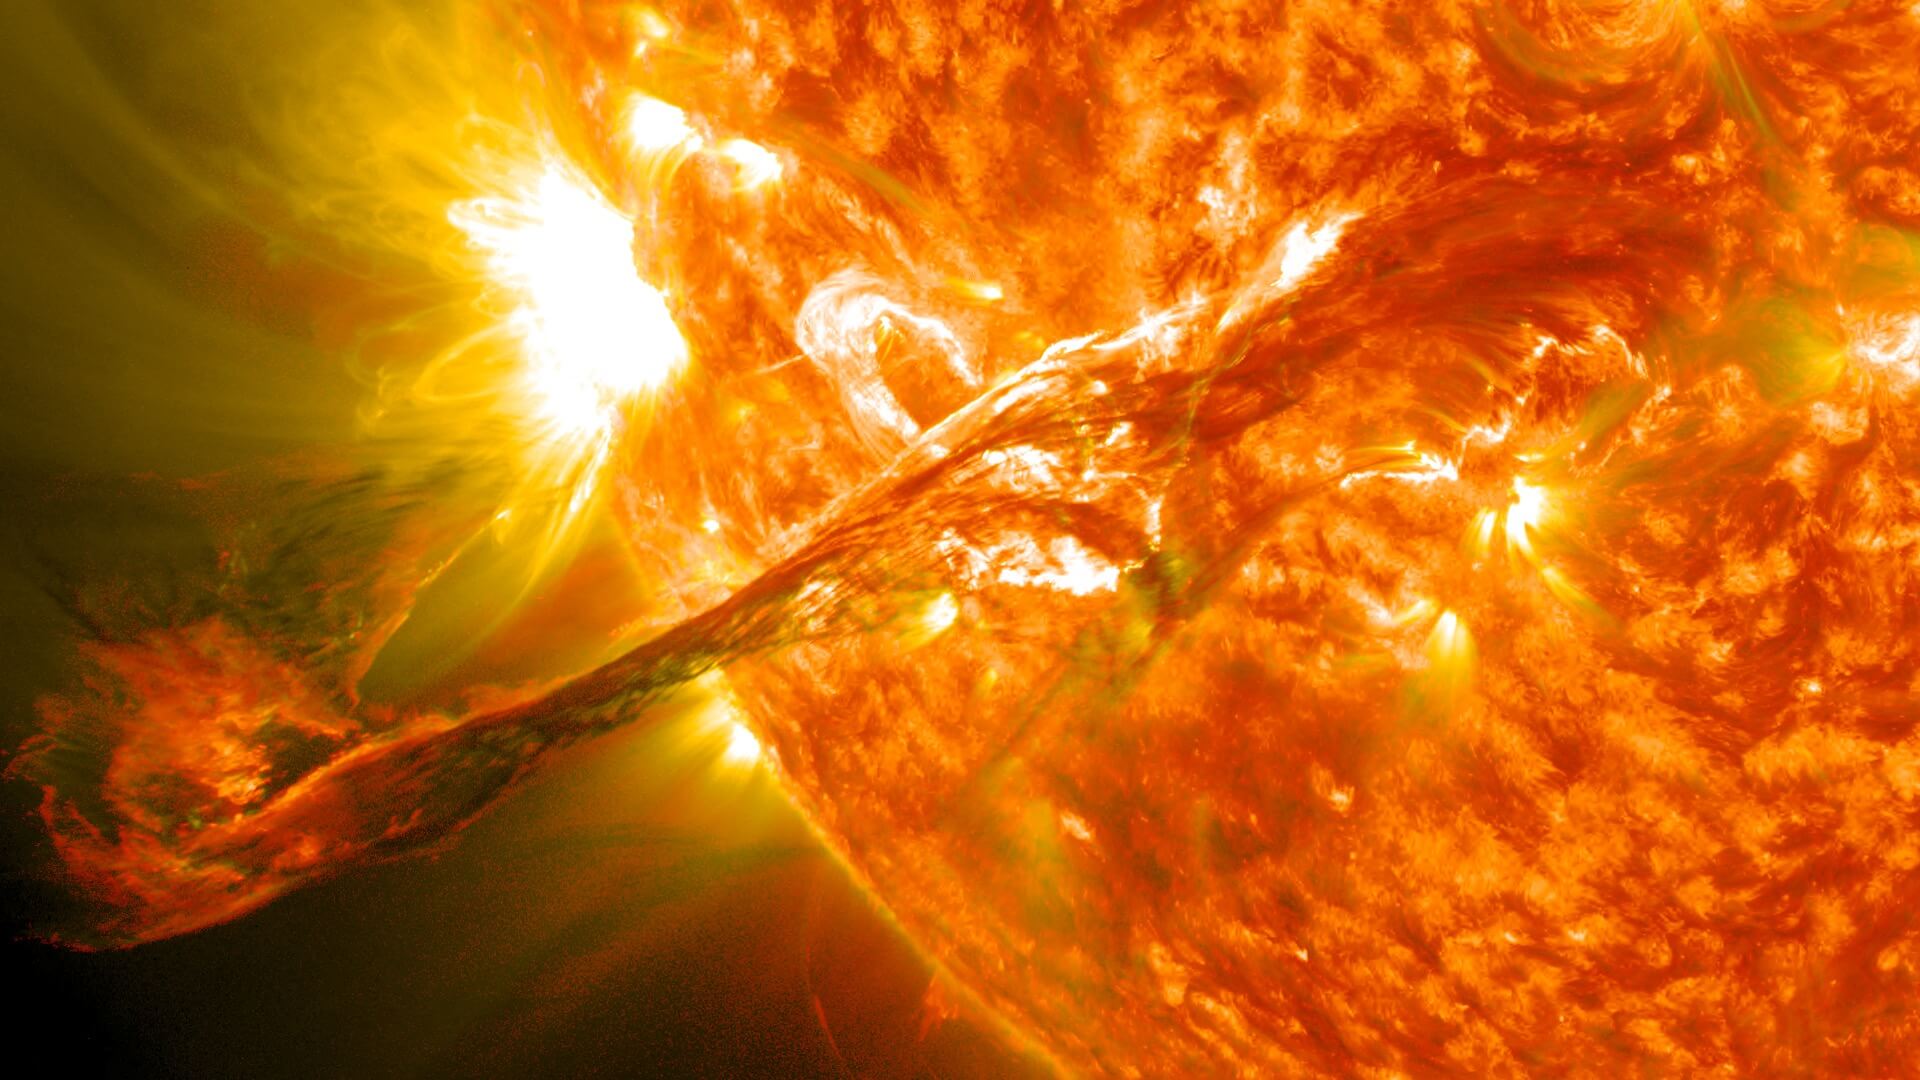 Scientists first recorded the magnetic explosion on the Sun